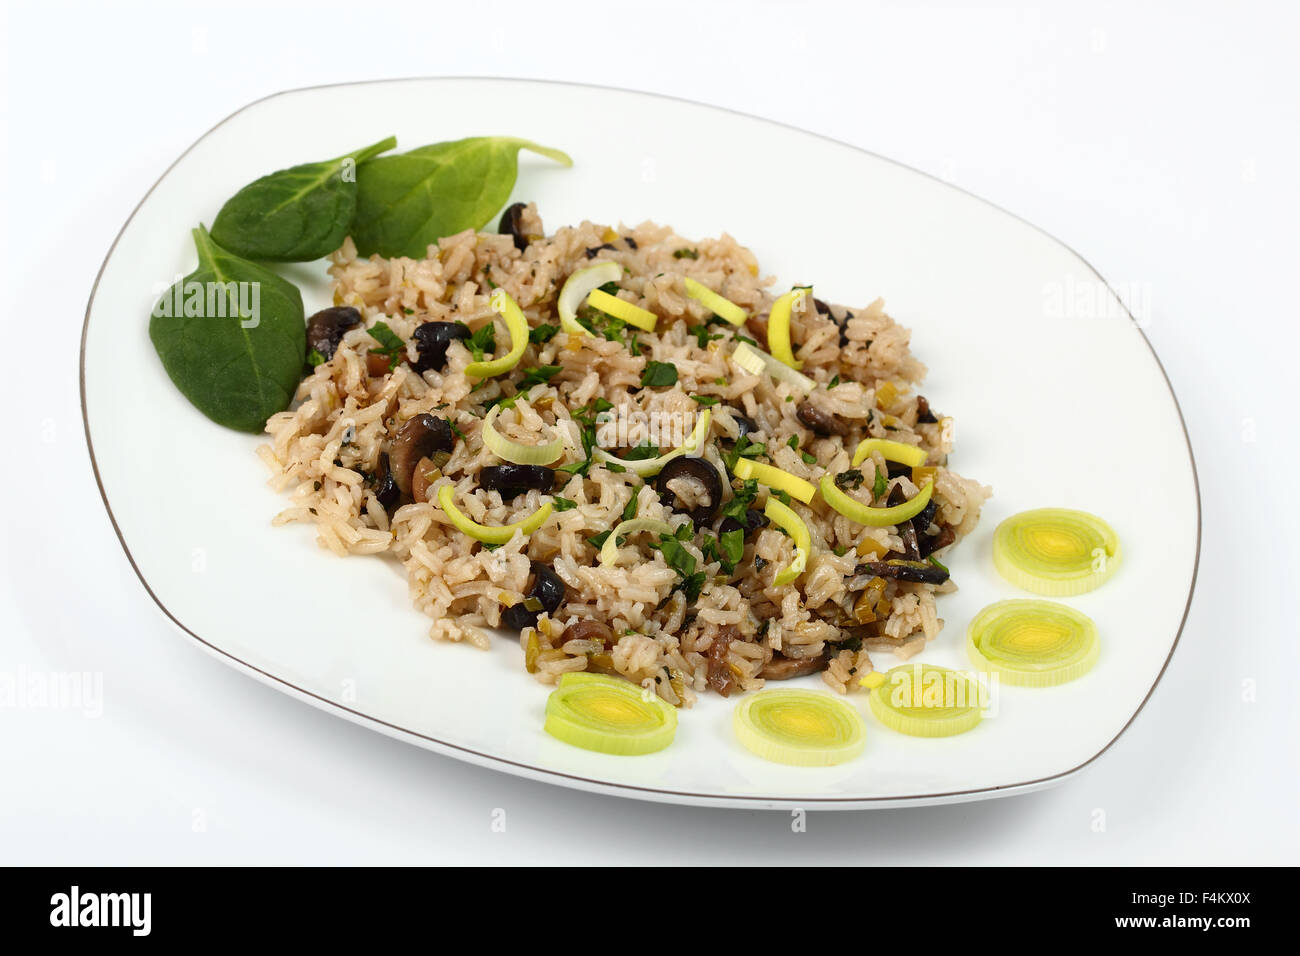 Risotto with Leek, Spinach and Olives. Isolated with clipping path. Stock Photo